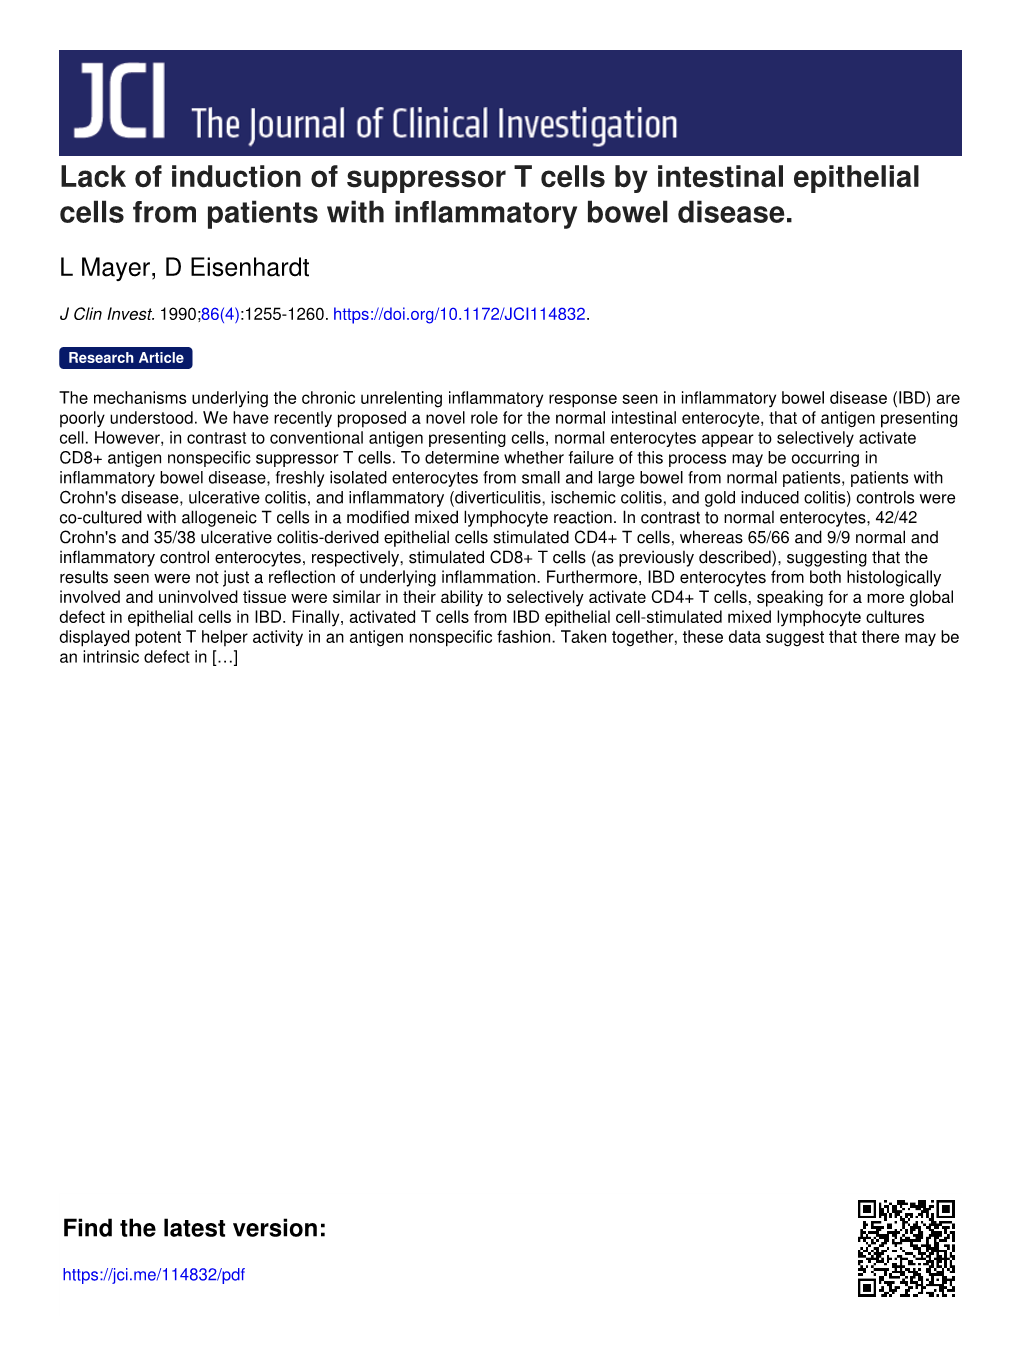 Lack of Induction of Suppressor T Cells by Intestinal Epithelial Cells from Patients with Inflammatory Bowel Disease